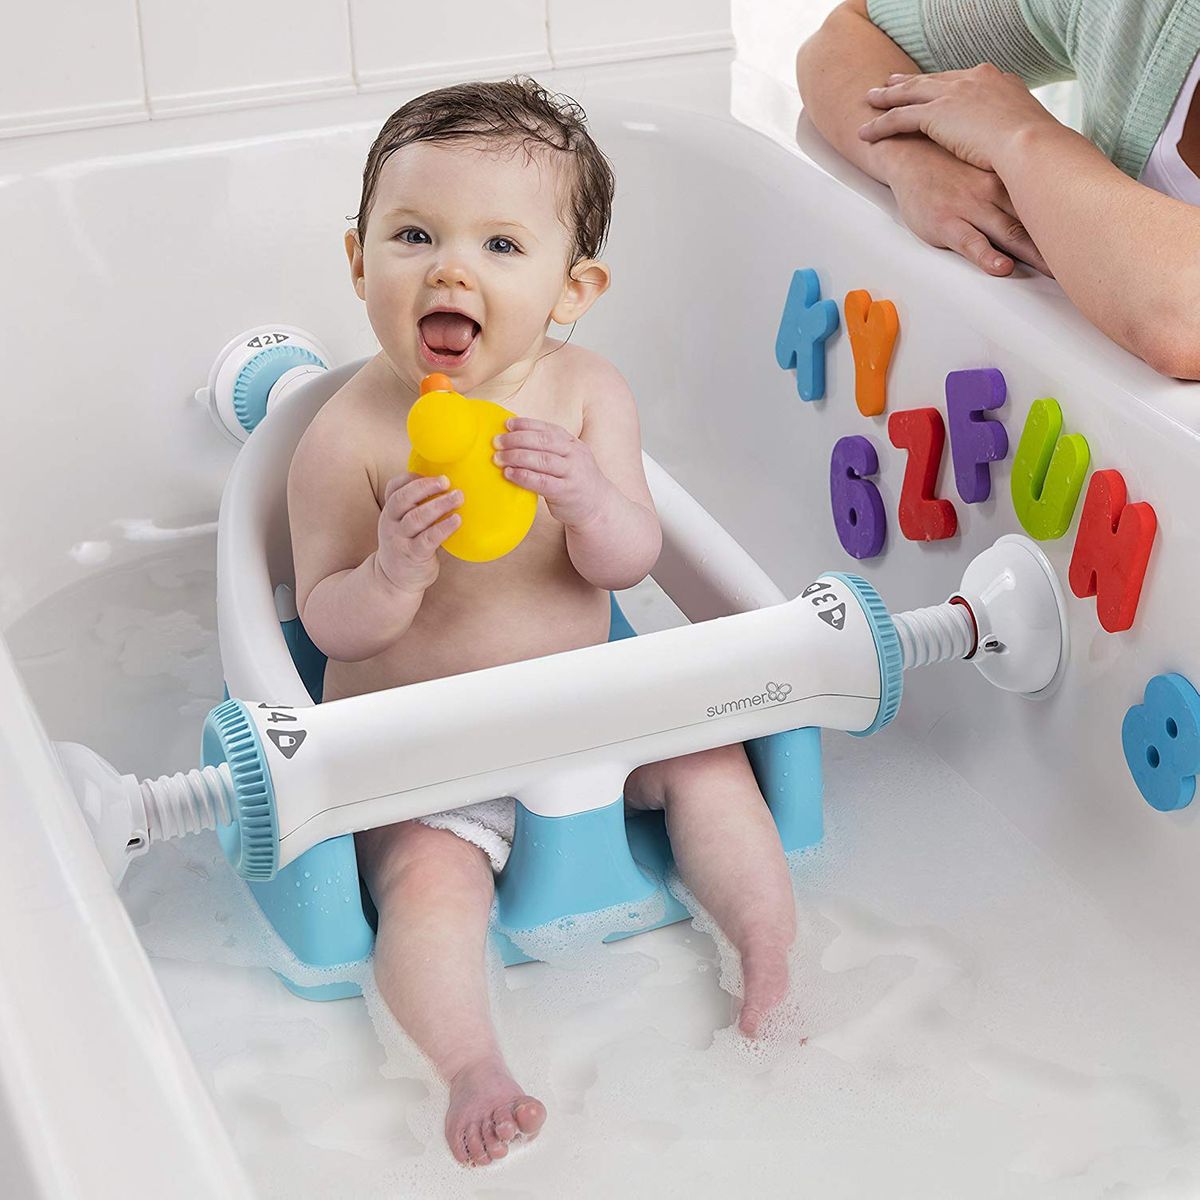 Baby bath aids allow support of your baby